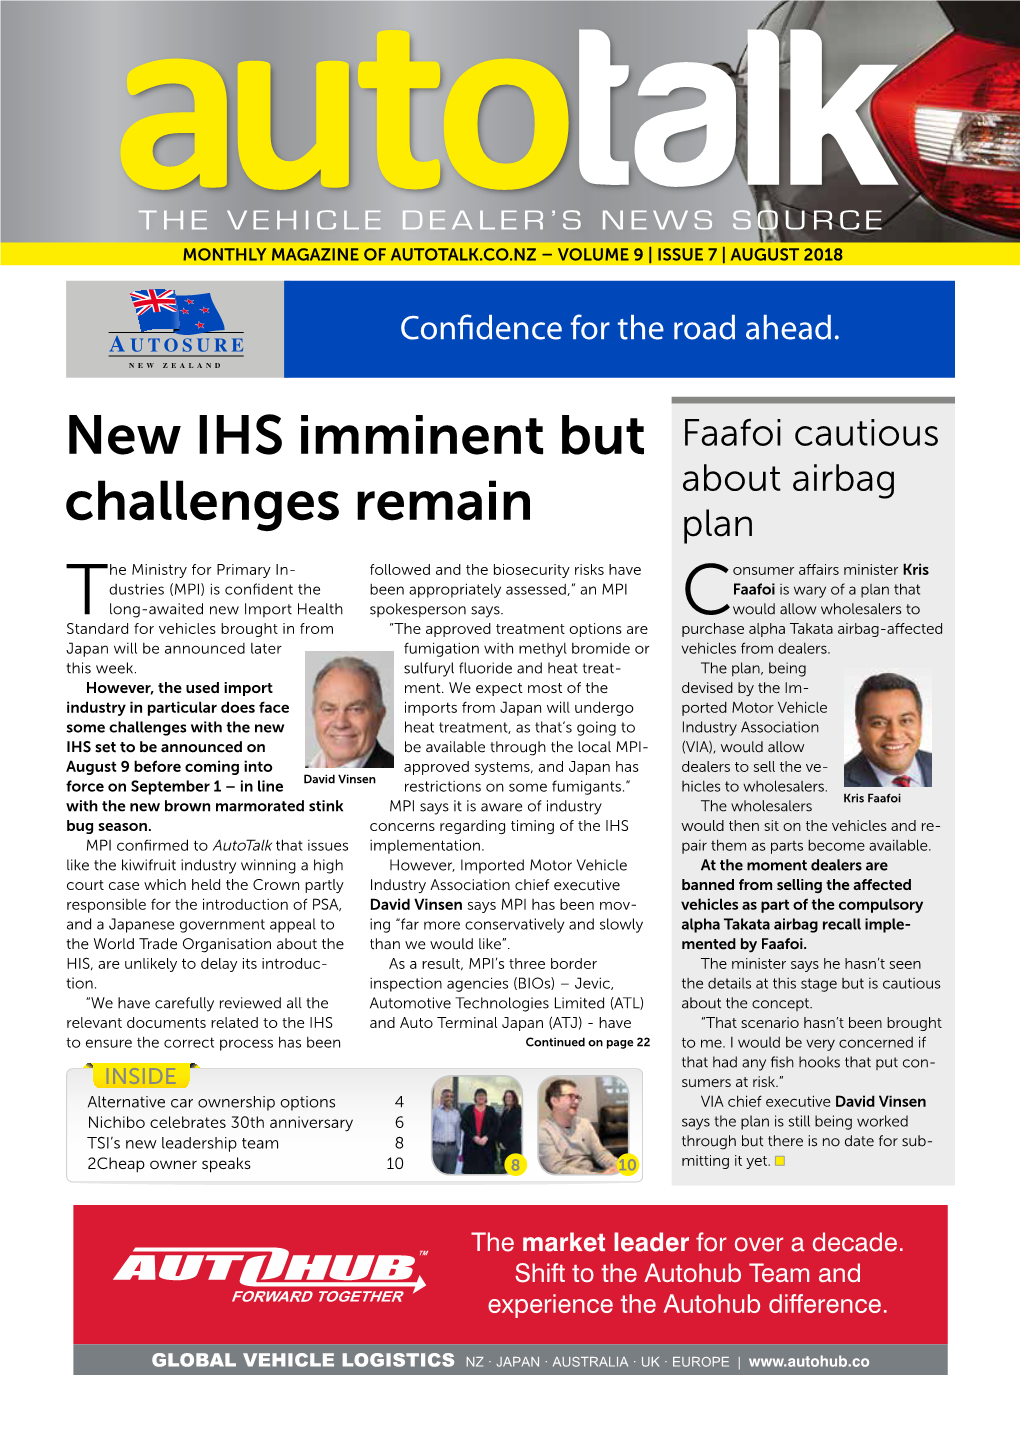 New IHS Imminent but Challenges Remain